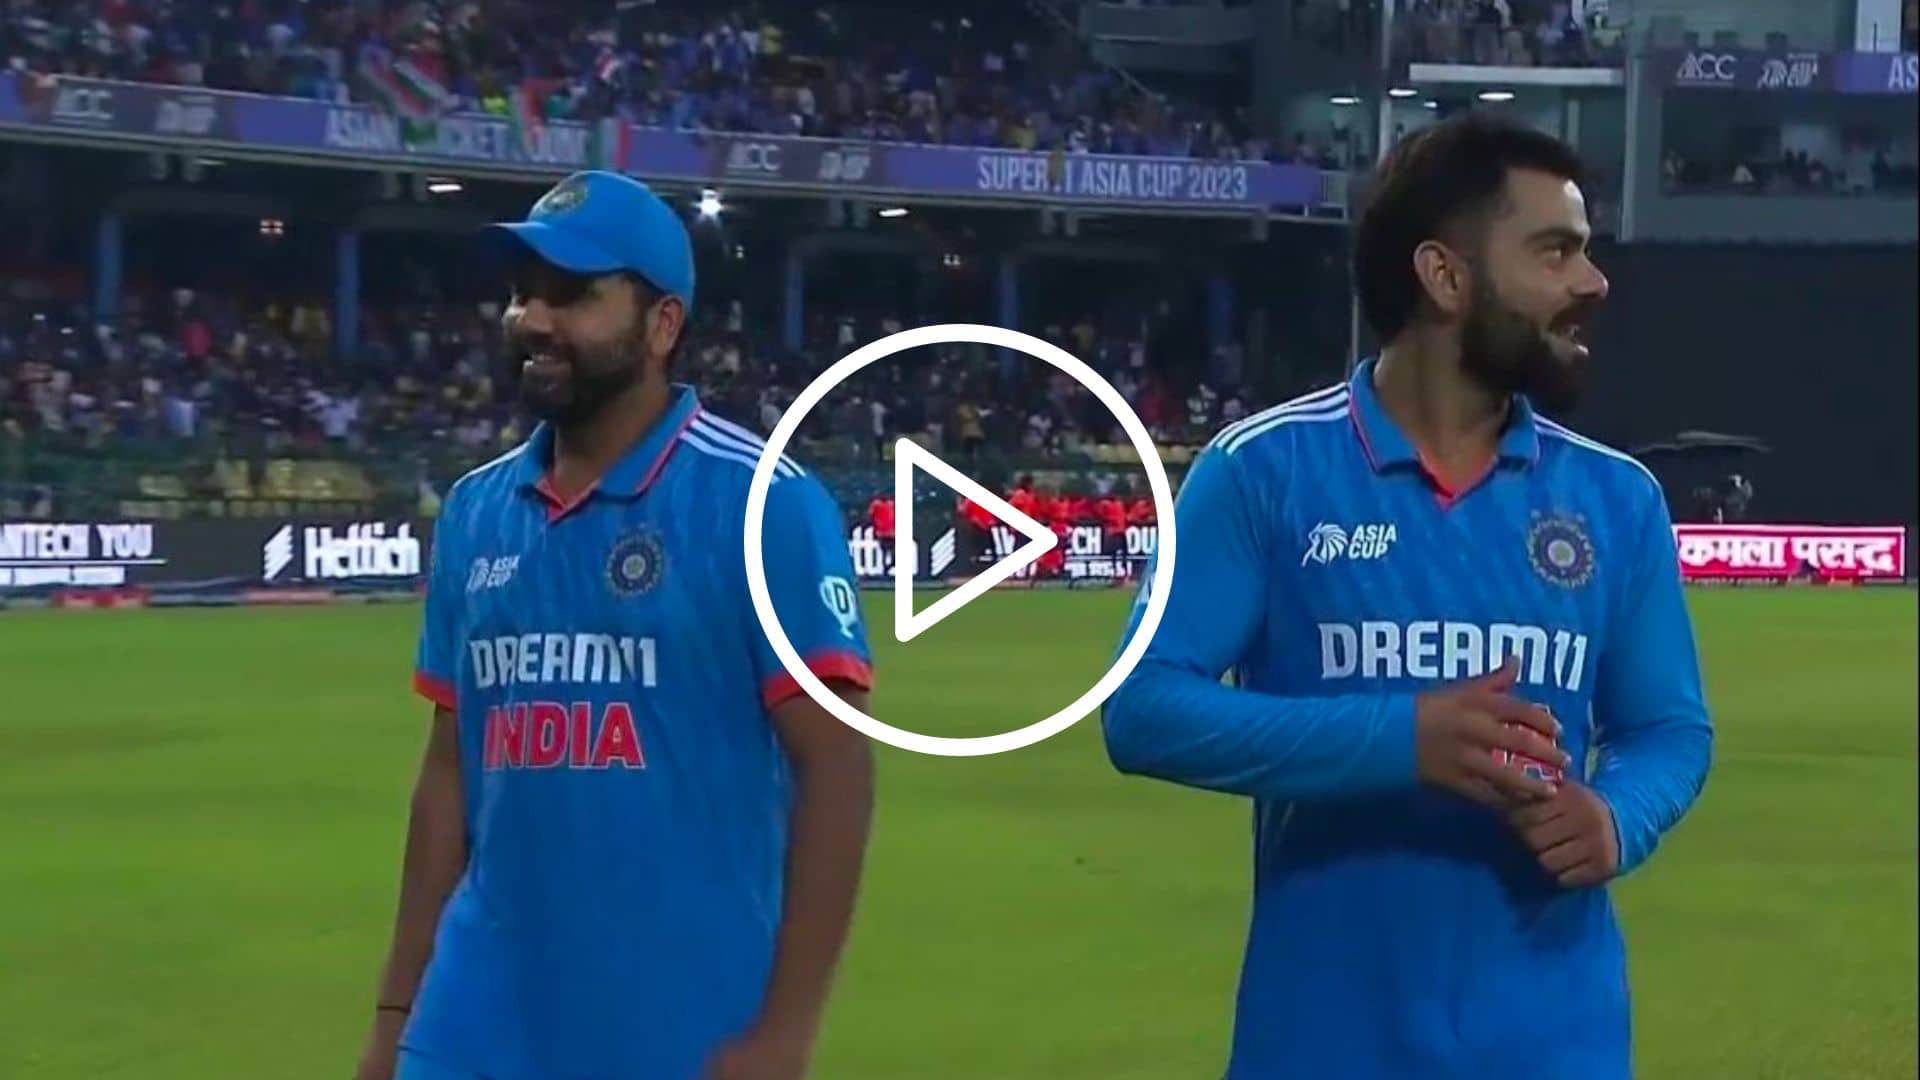 [Watch] Kohli & Rohit's Joyous Dance Moves After India Thrash SL In Asia Cup Final